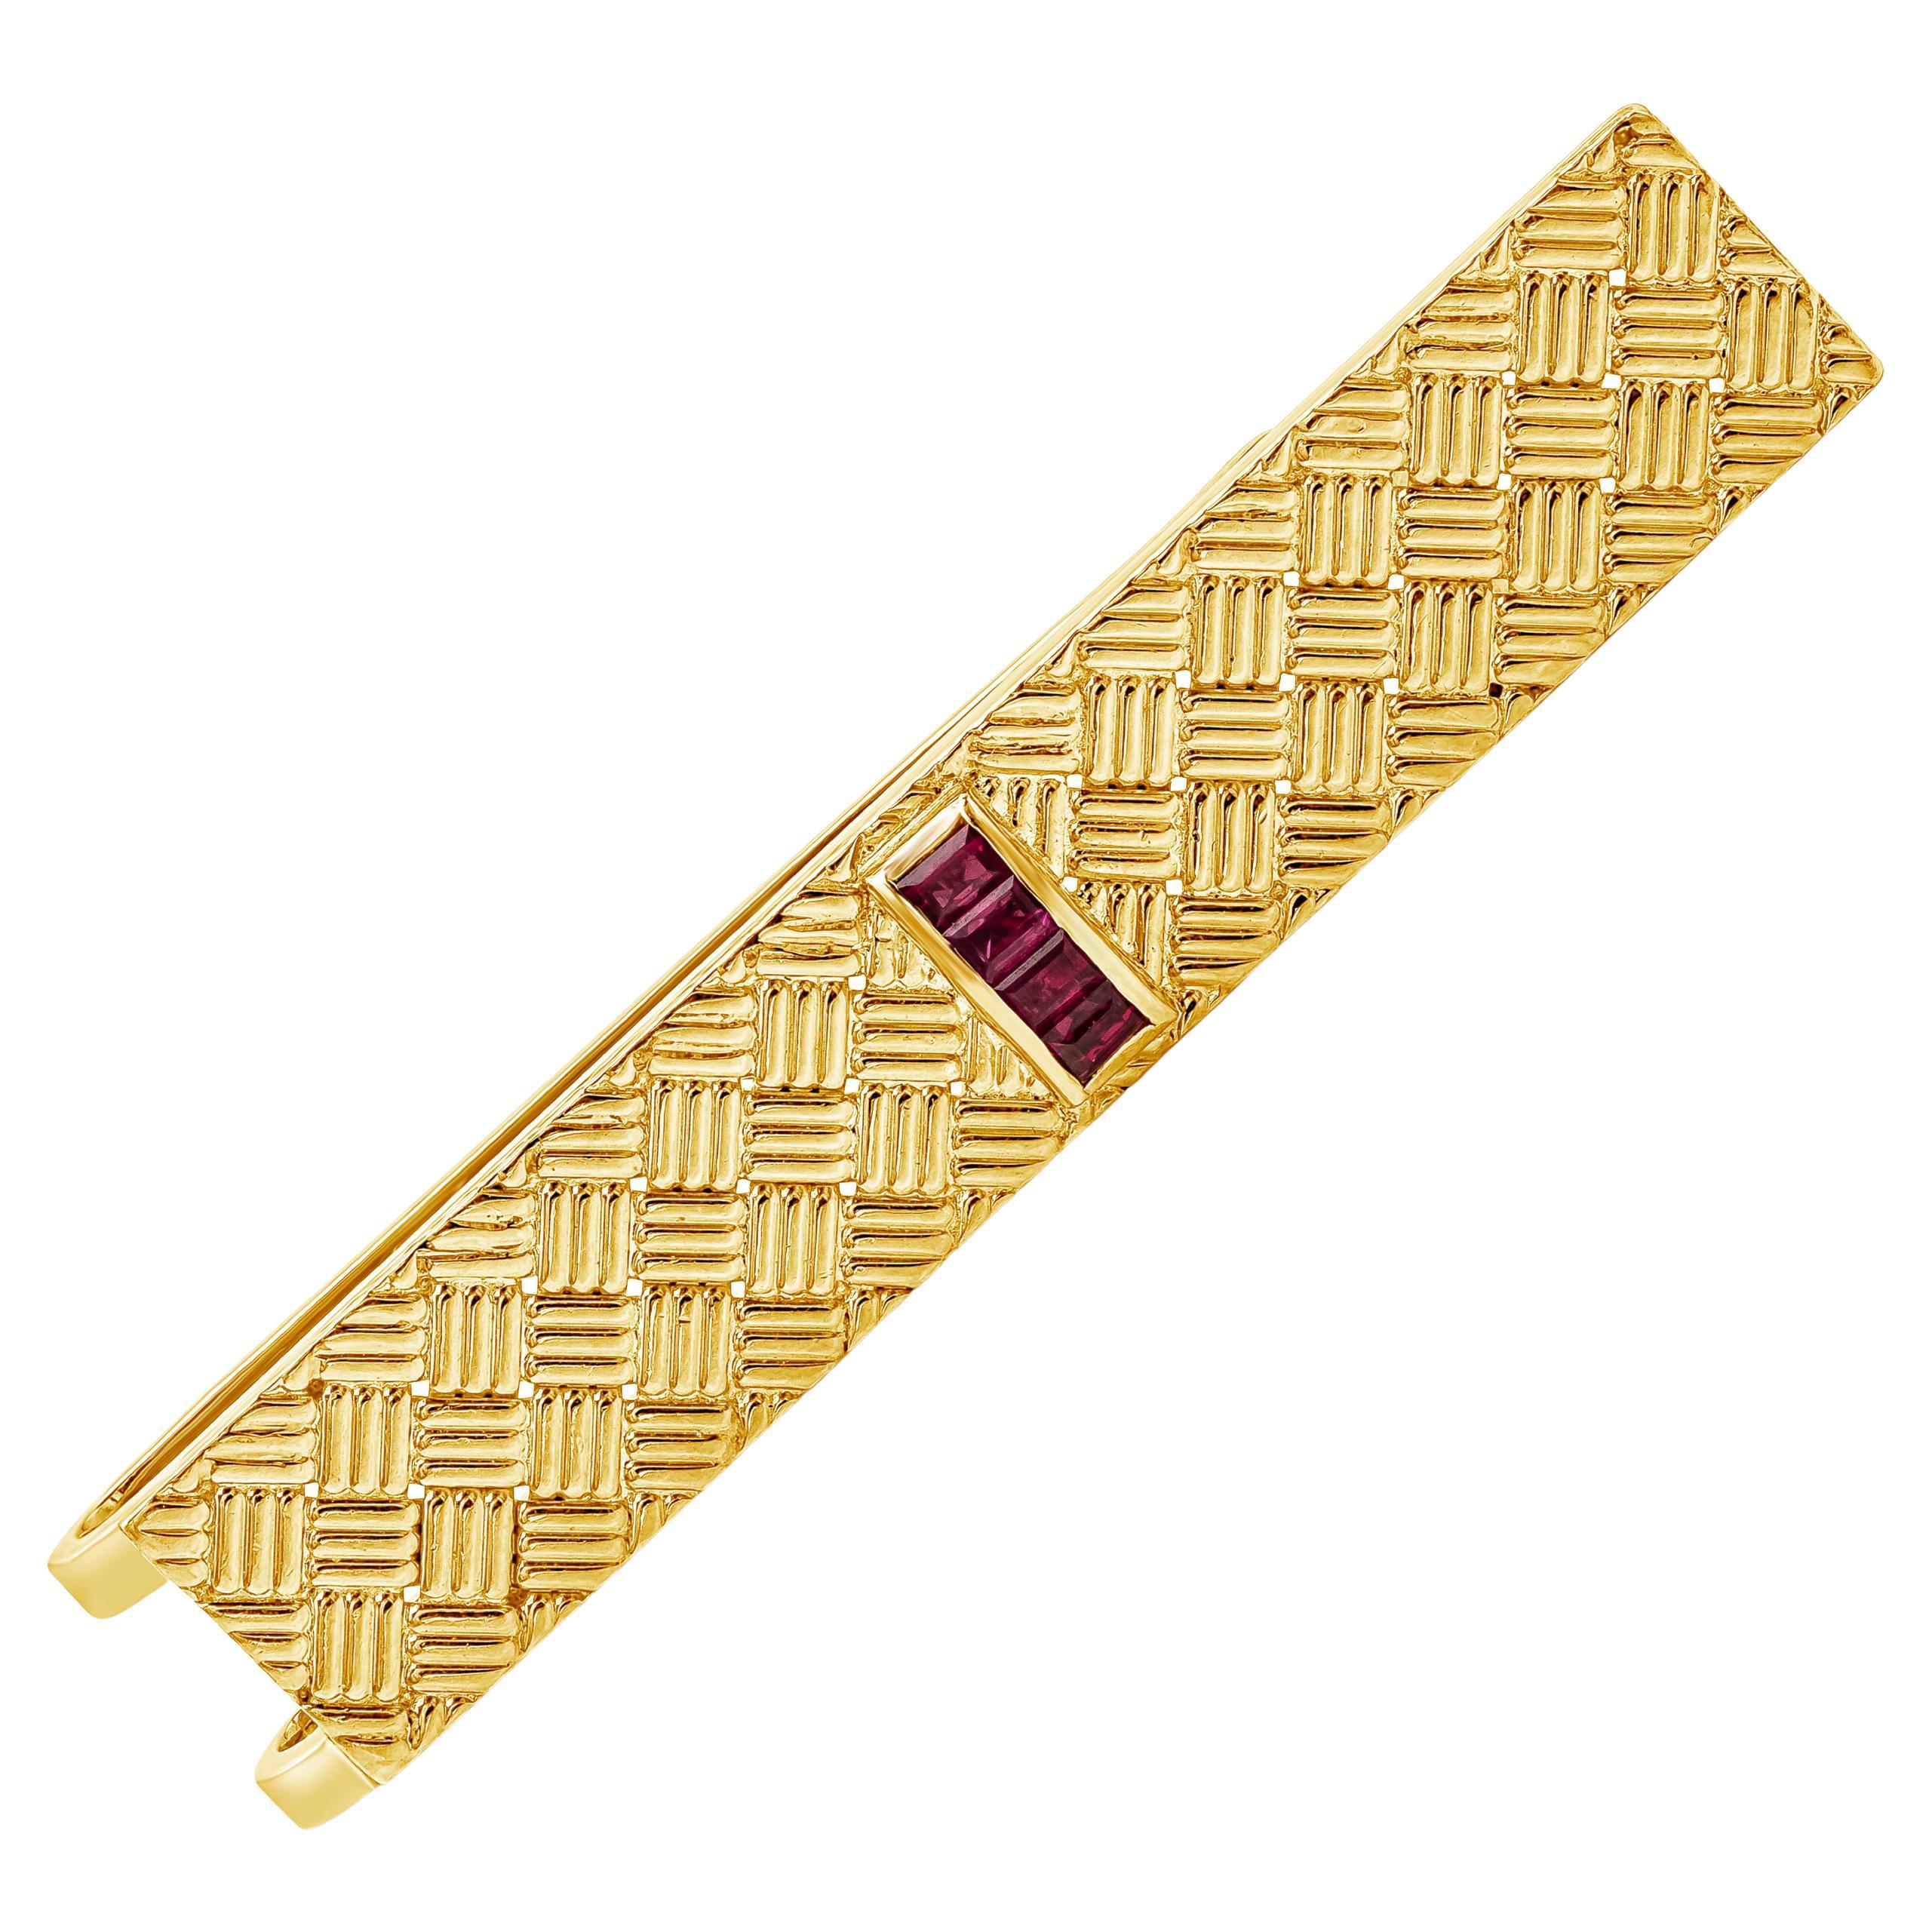 Tiffany & Co. 0.35 Carat Ruby Weave Design Tie Clip in 18k Yellow Gold For Sale